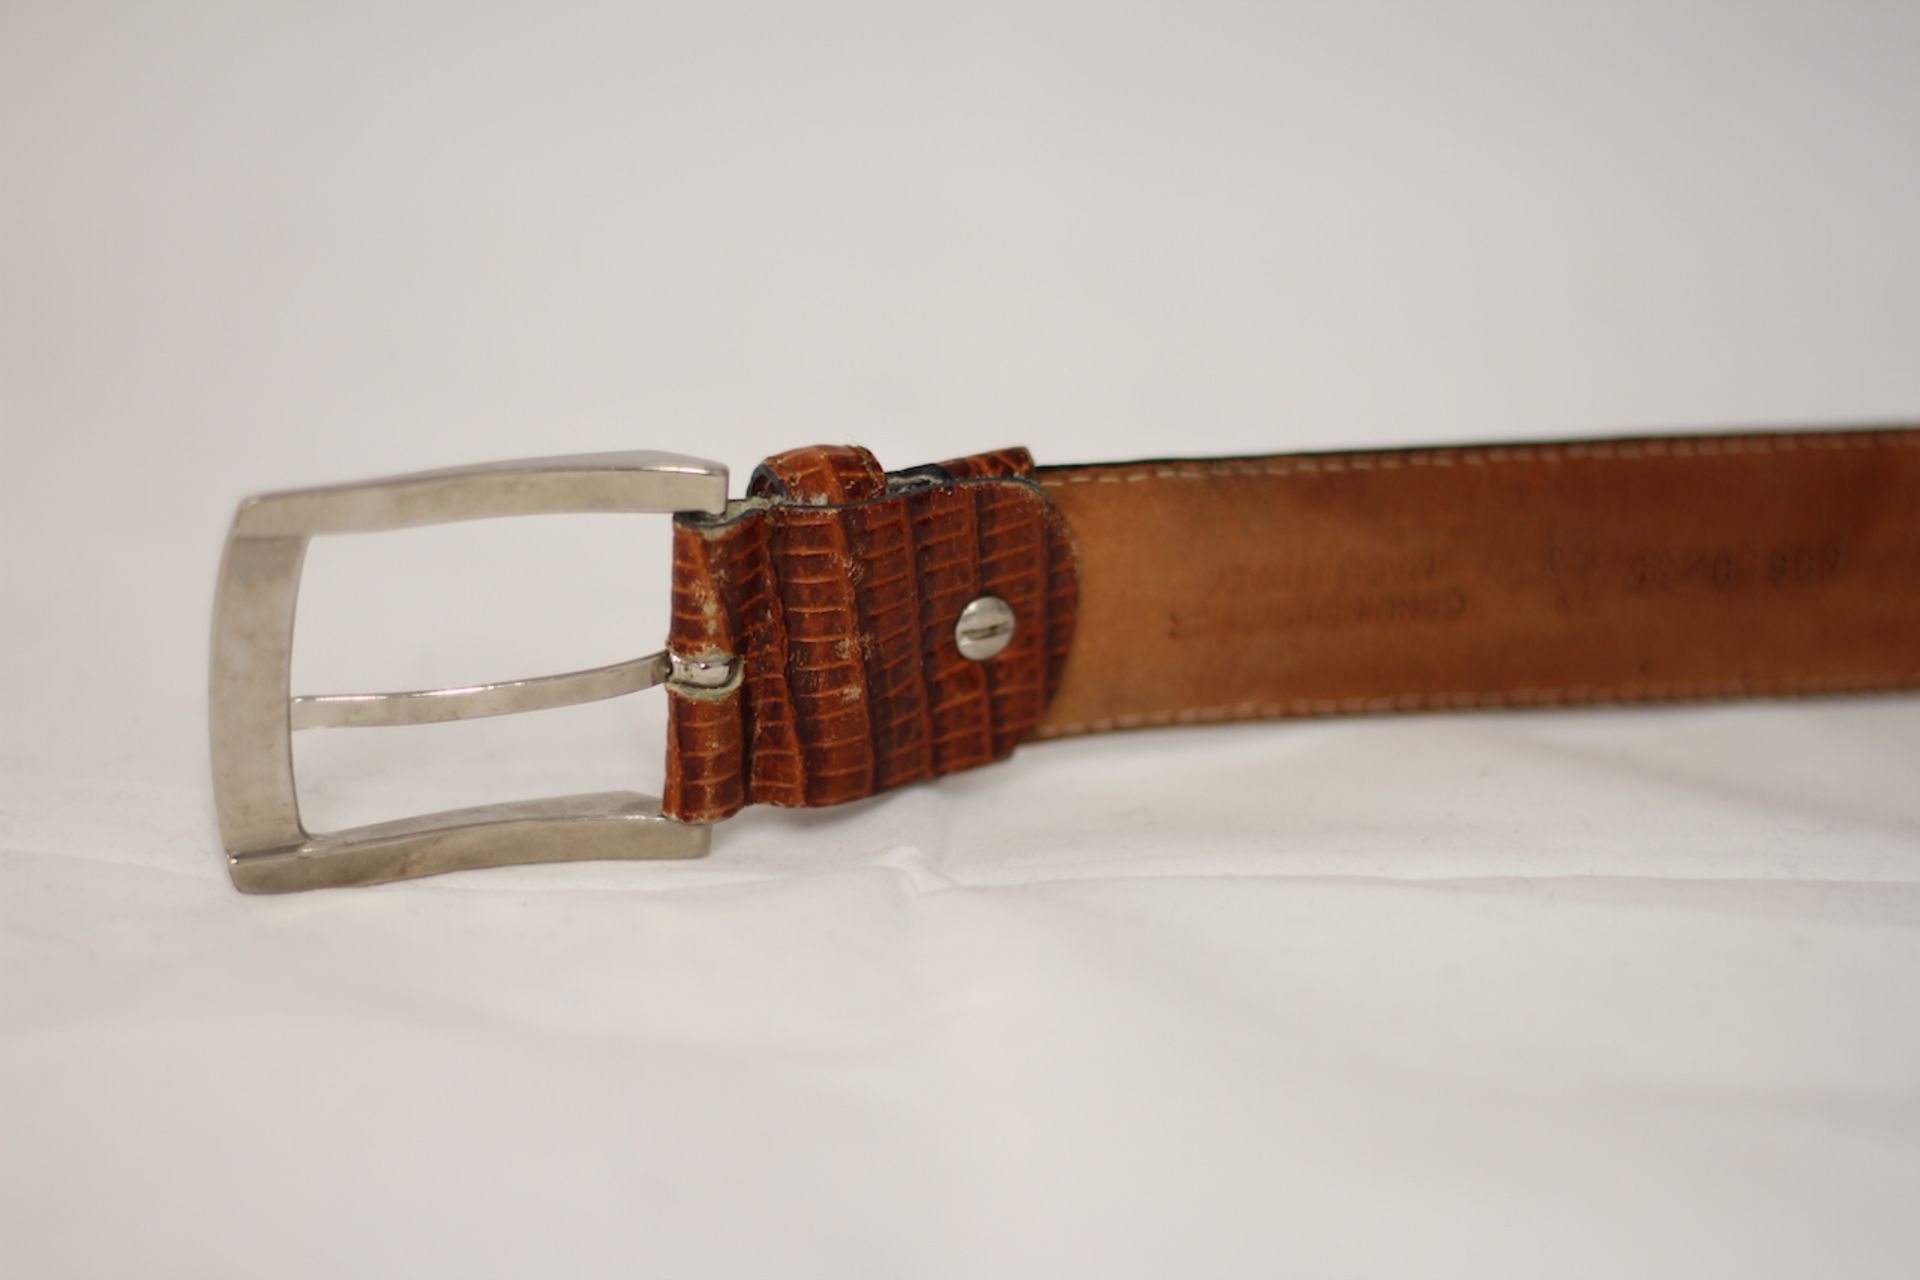 BULGARI GENIUINE LEATHER BELT, Colour : BROWN, AGE: UNKNOWN, SIZE: UK48, CONDITION GRADE: 2 GOOD * - Image 2 of 4